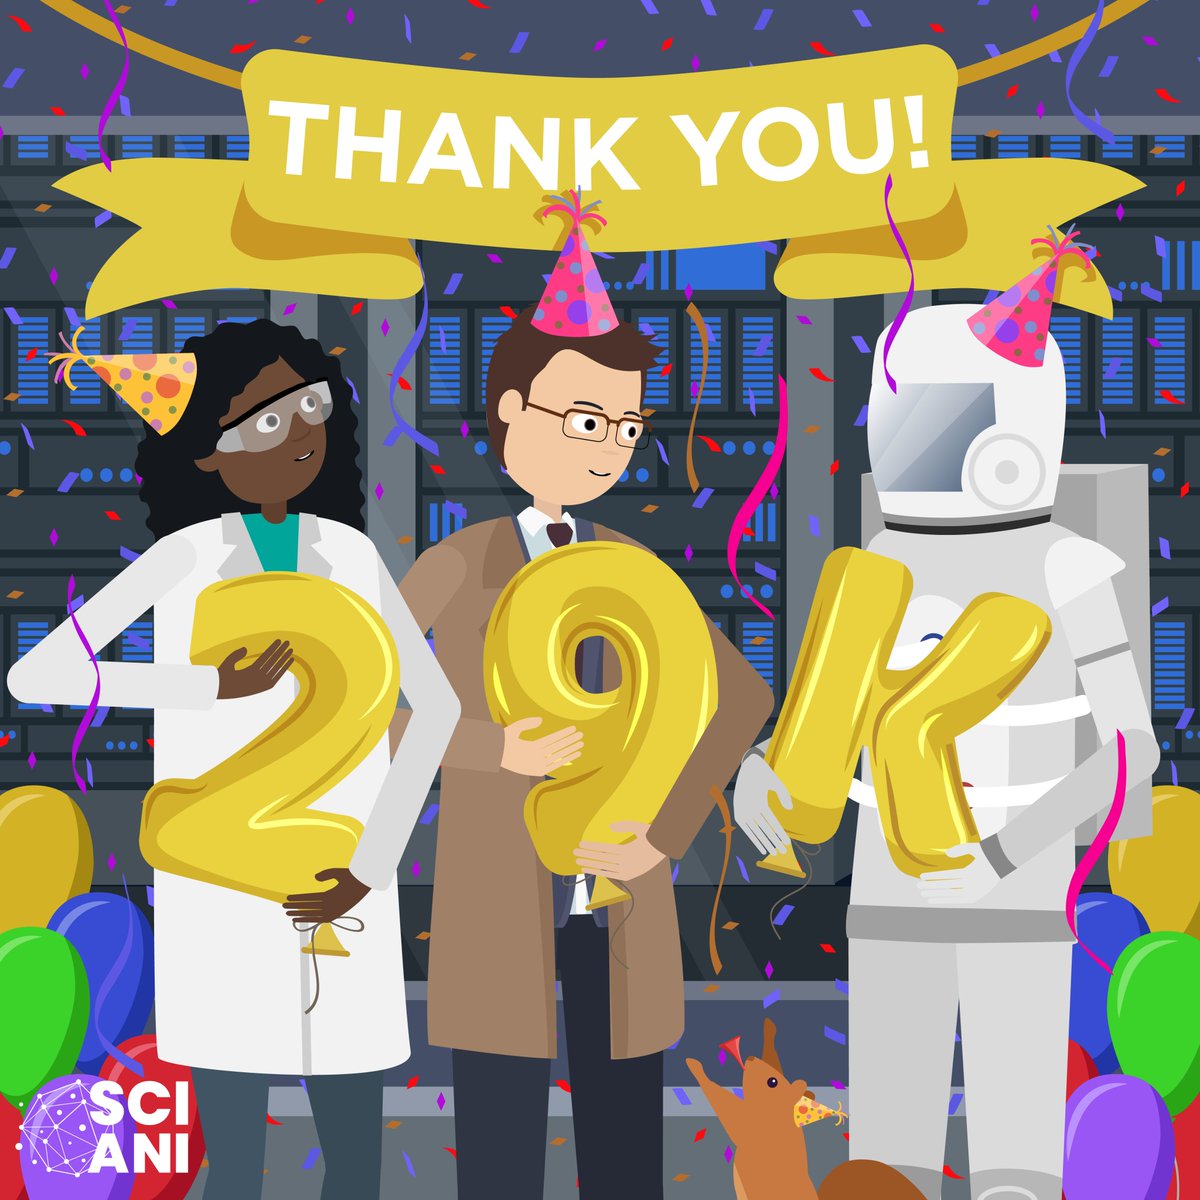 We have hit 29,000 subscribers on @YouTube 🙌📹 Thank you so much for watching; your engagement and enthusiasm drive us forward! Make sure to subscribe here to keep up to date with our channel: youtube.com/c/SciAni